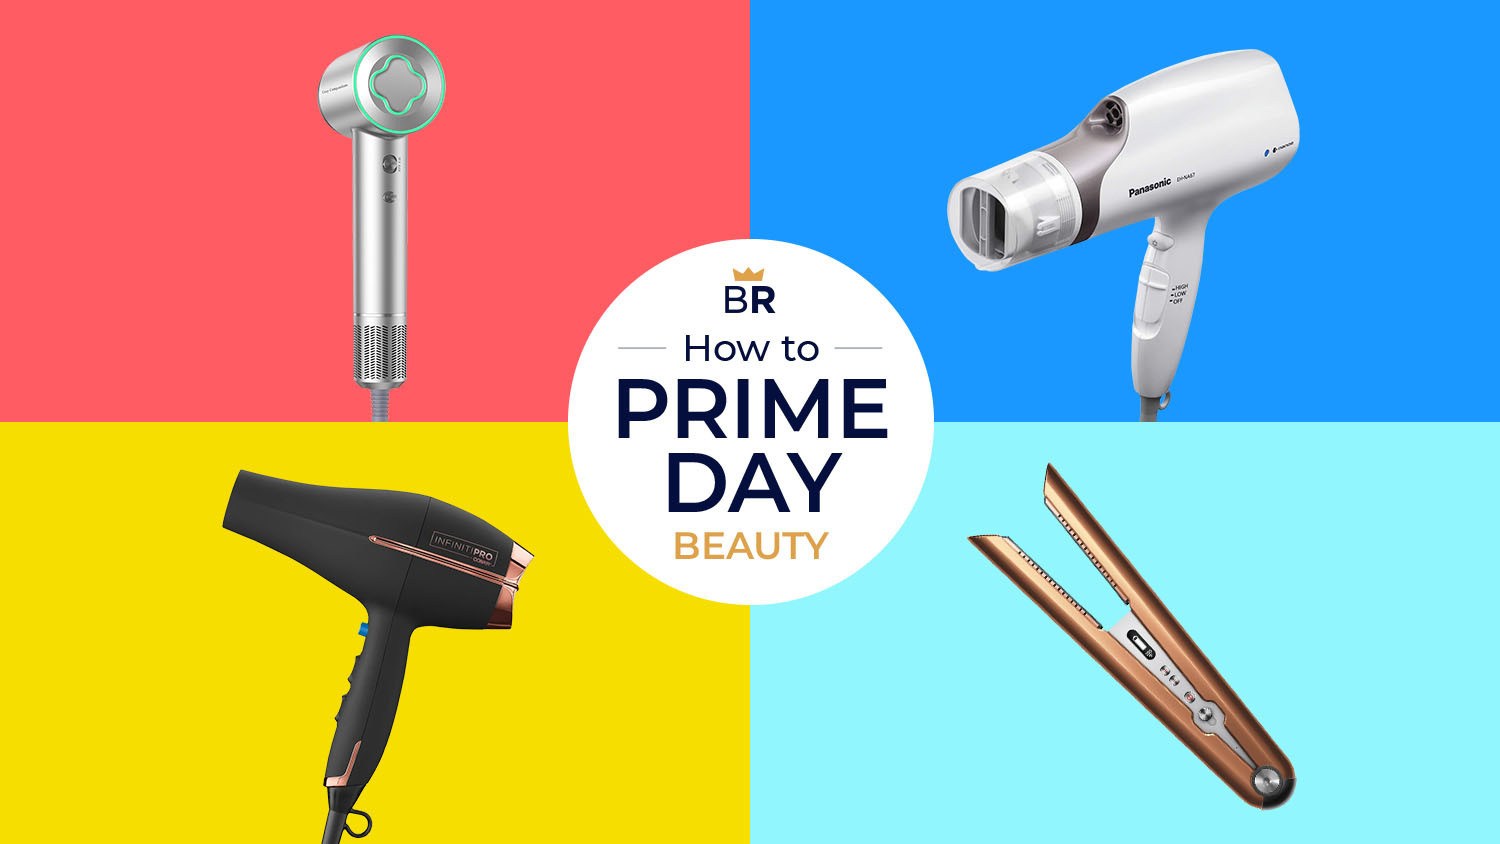 BestReviews illustration / If you missed the Prime Day Airwrap deal, these hair tools are still on sale